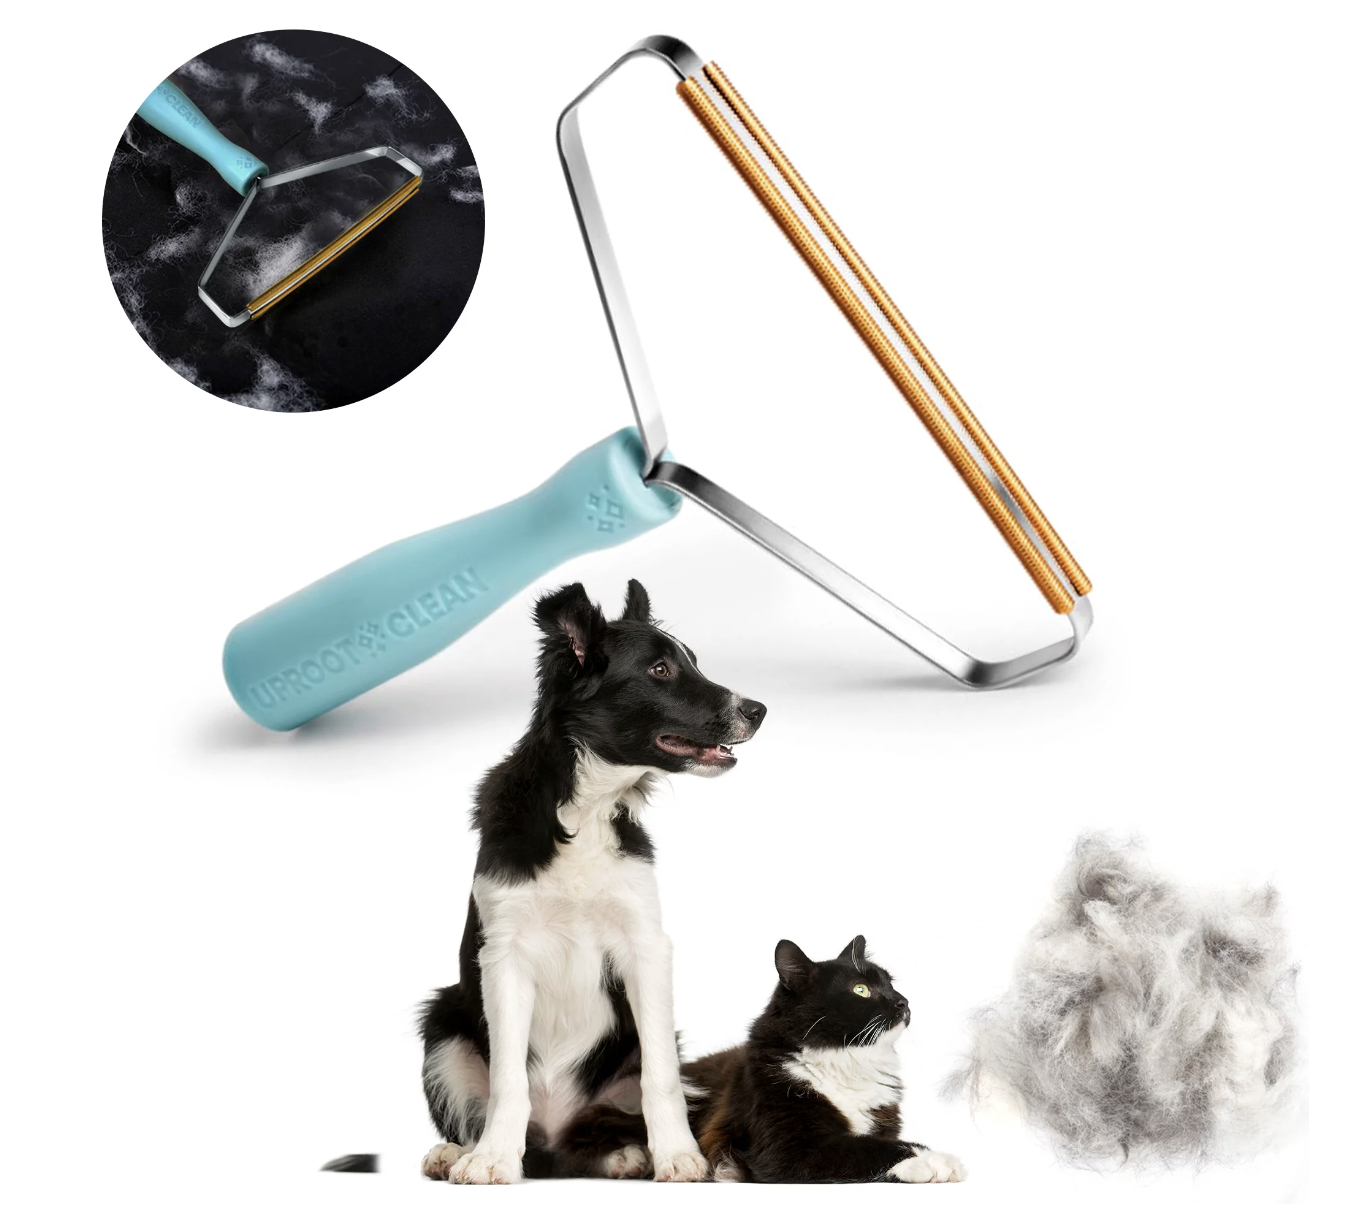 The lint rollers with a dog and cat